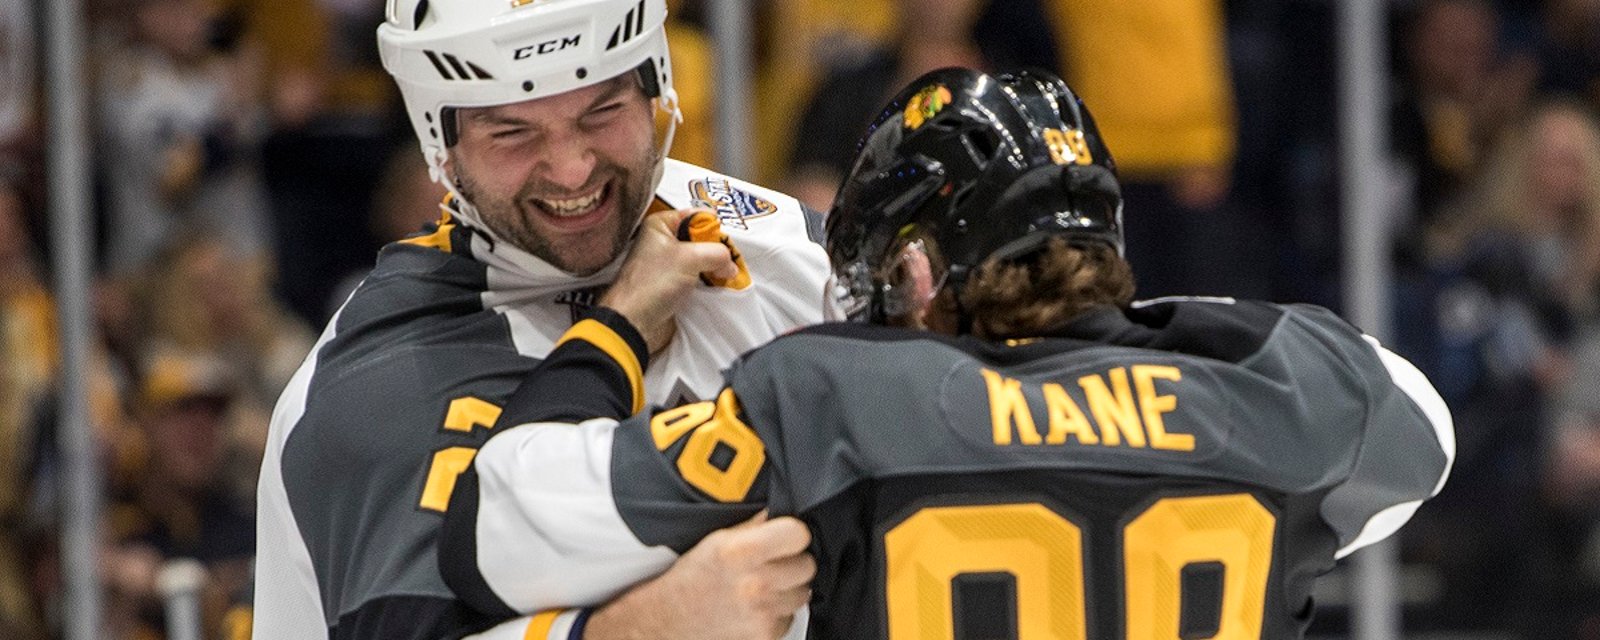 John Scott says an NHL star has asked him to join his team as an enforcer.